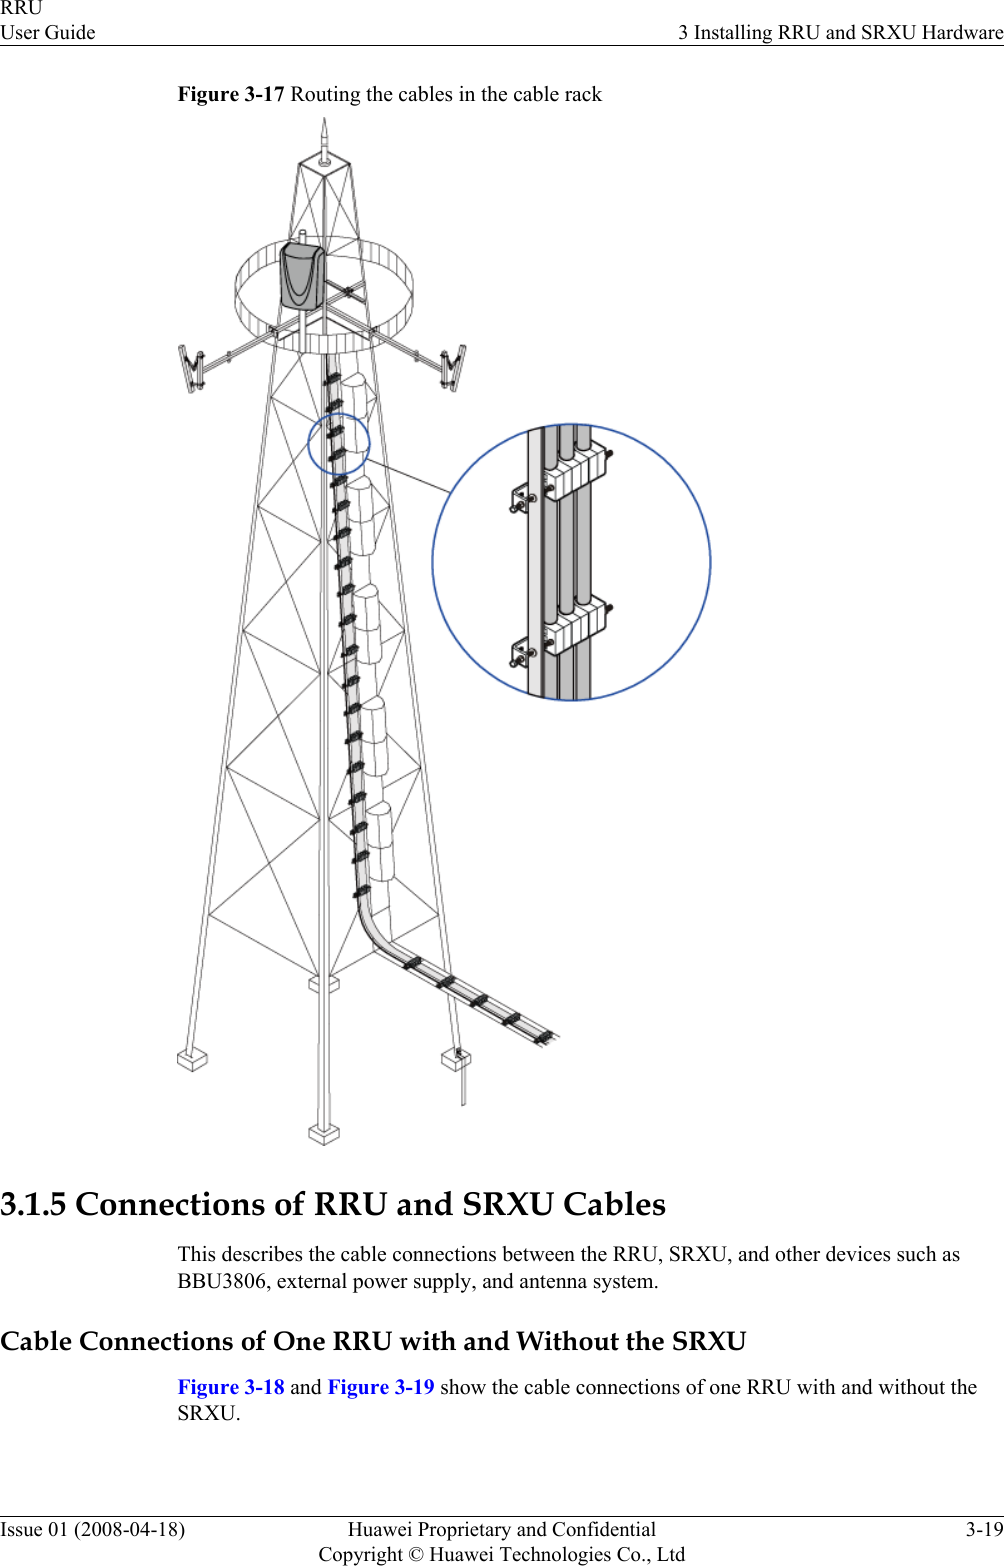 Figure 3-17 Routing the cables in the cable rack3.1.5 Connections of RRU and SRXU CablesThis describes the cable connections between the RRU, SRXU, and other devices such asBBU3806, external power supply, and antenna system.Cable Connections of One RRU with and Without the SRXUFigure 3-18 and Figure 3-19 show the cable connections of one RRU with and without theSRXU.RRUUser Guide 3 Installing RRU and SRXU HardwareIssue 01 (2008-04-18) Huawei Proprietary and ConfidentialCopyright © Huawei Technologies Co., Ltd3-19